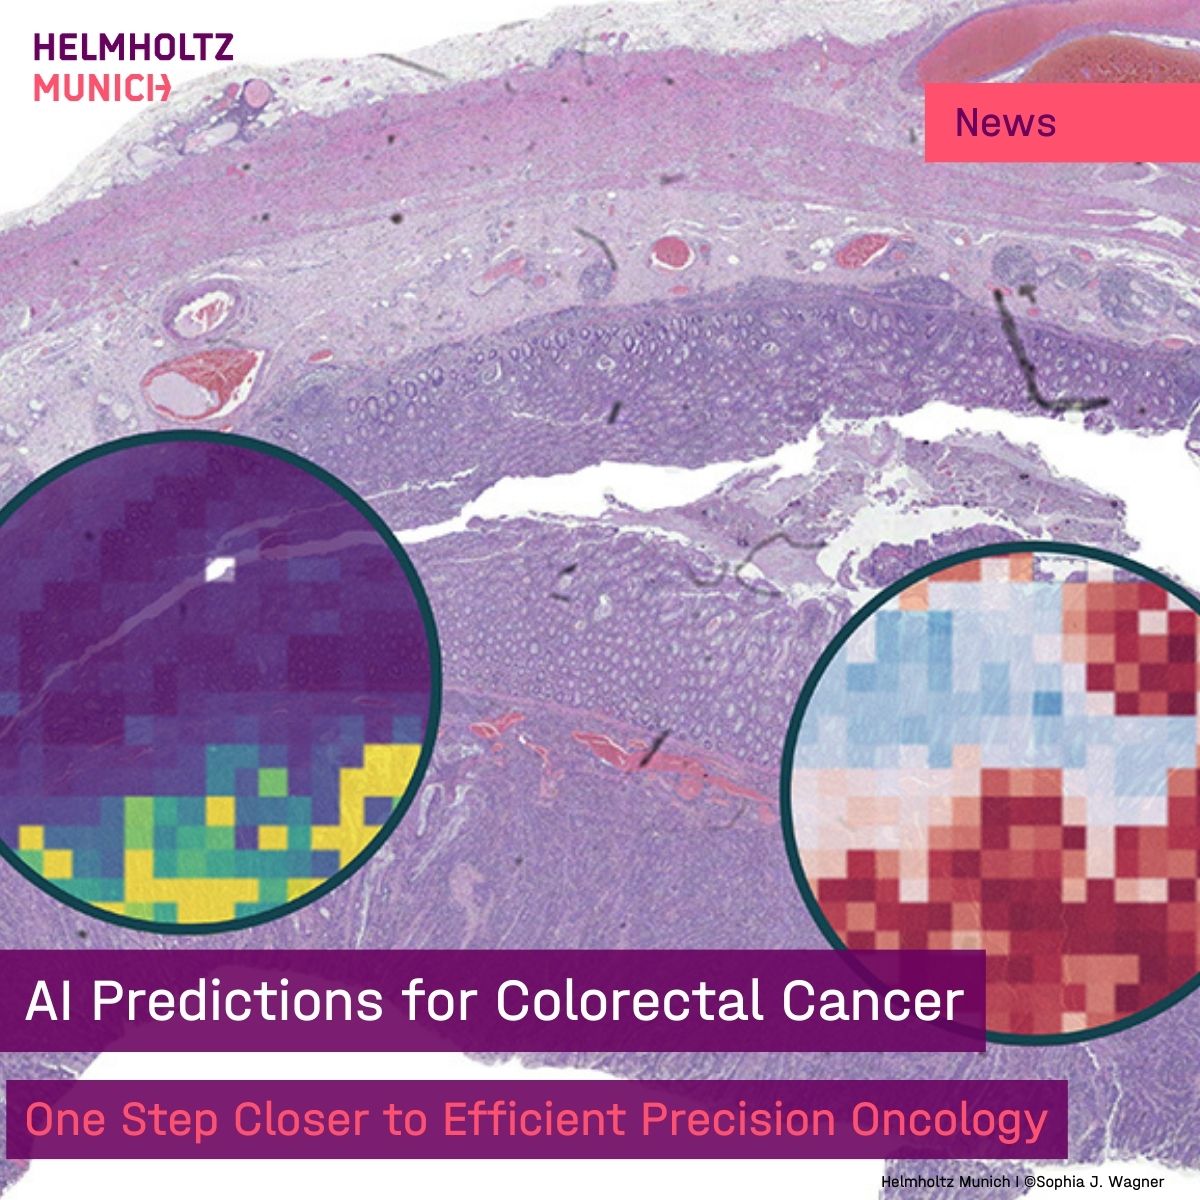 📝Hope for Colorectal #Cancer Using #AI, scientists from #HelmholtzMunich & TU Dresden boost #precision #medicine in #oncology: Novel model for #biomarker detection helps to analyze tissue quicker, speeding up treatment decisions. 👉more insights: t1p.de/pmcs0 @jnkath